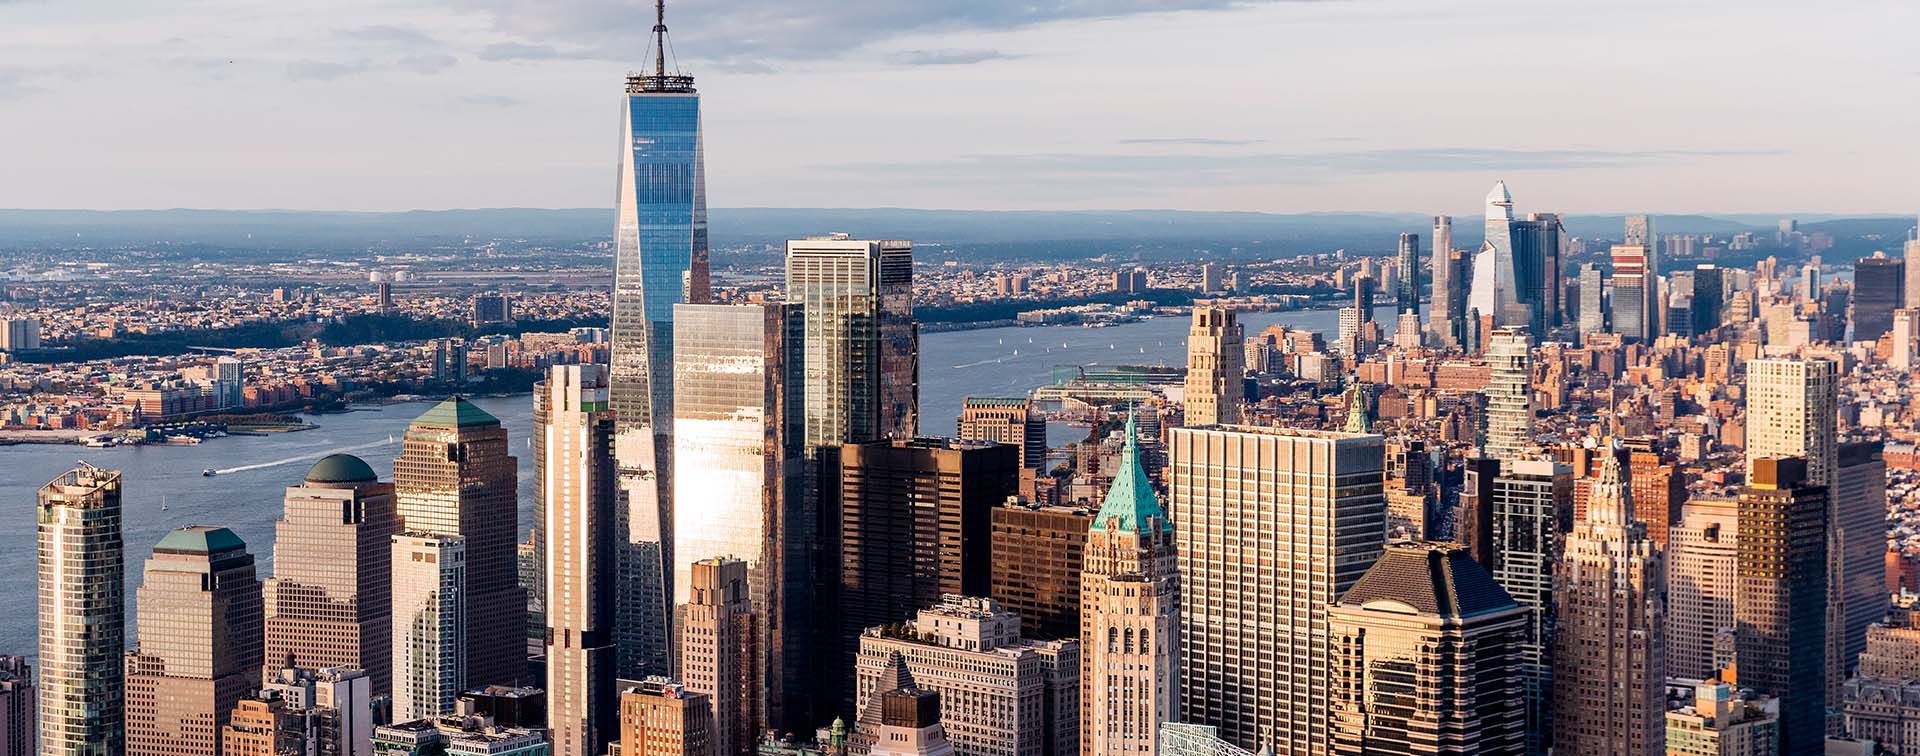 New York City skyline seen from a high angle, featuring the One World Trade Center and the Hudson River 